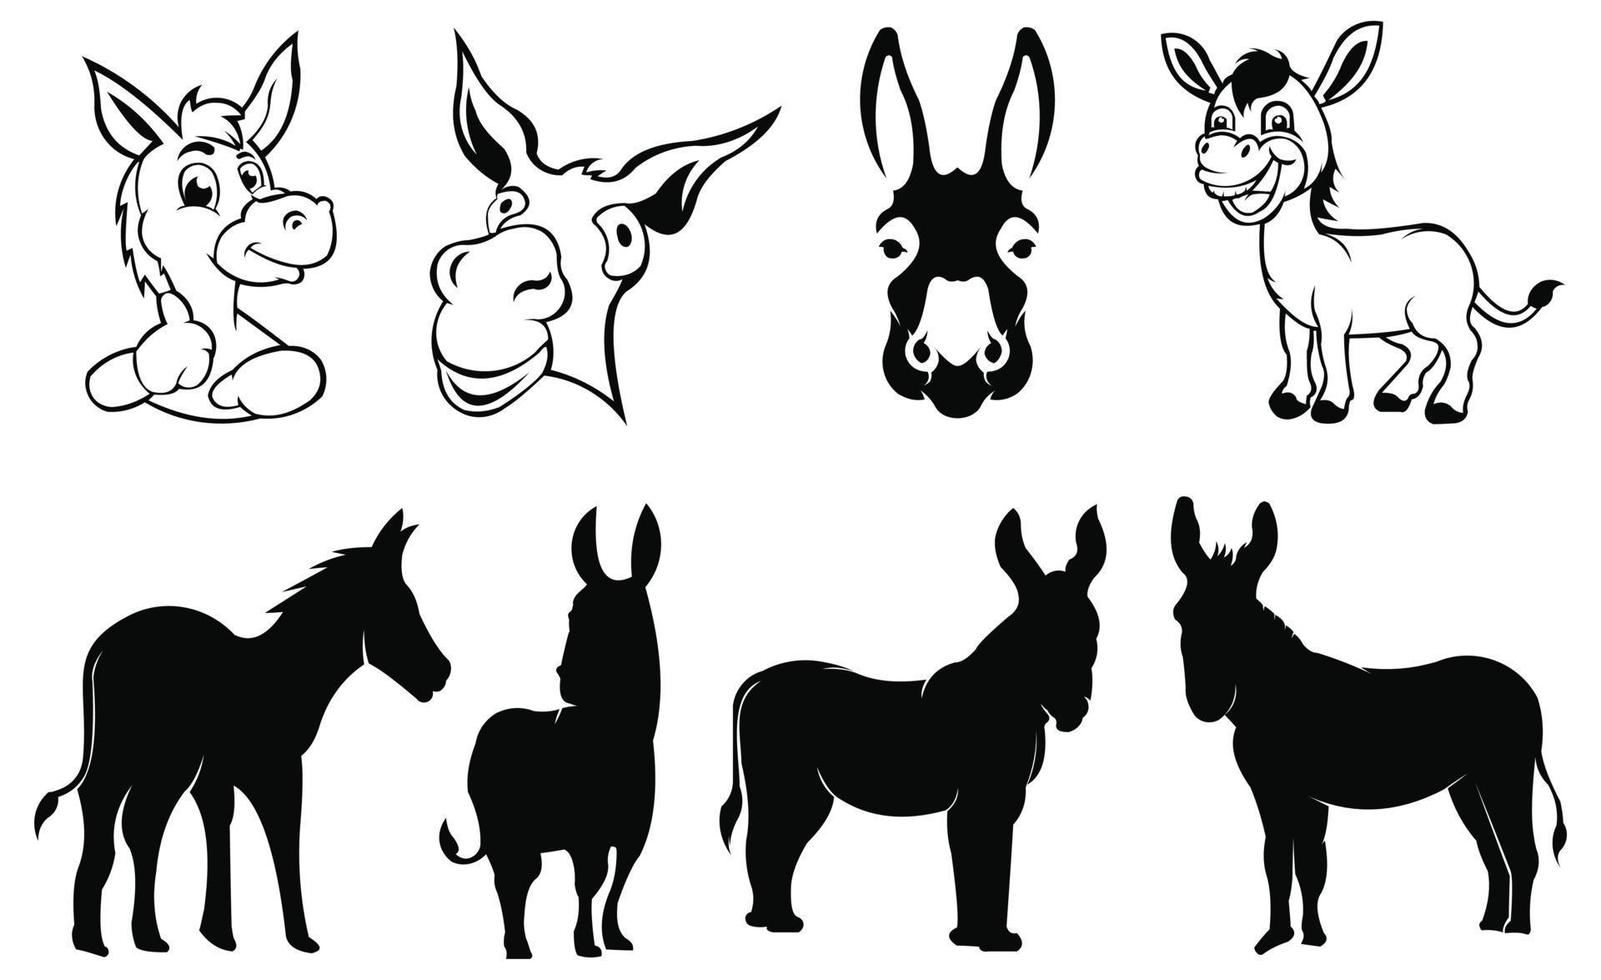 A donkey cute animal cartoon character , Donkey icon, Donkey symbol design from Animals collection. vector